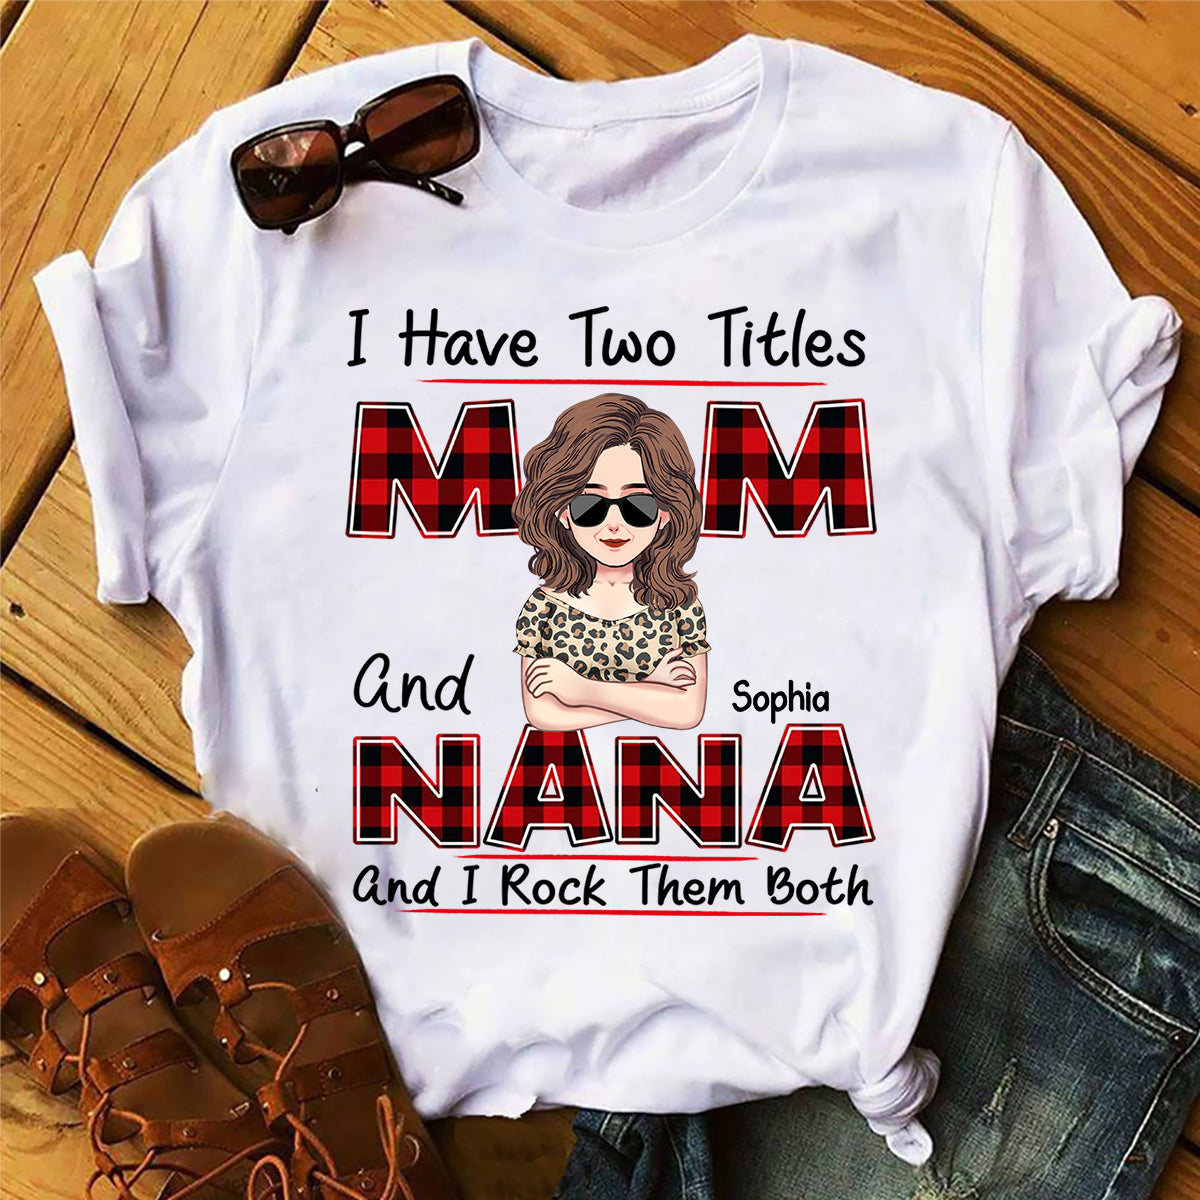 I Have Two Titles - Personalized Mother's Day Grandma T-shirt and Hoodie